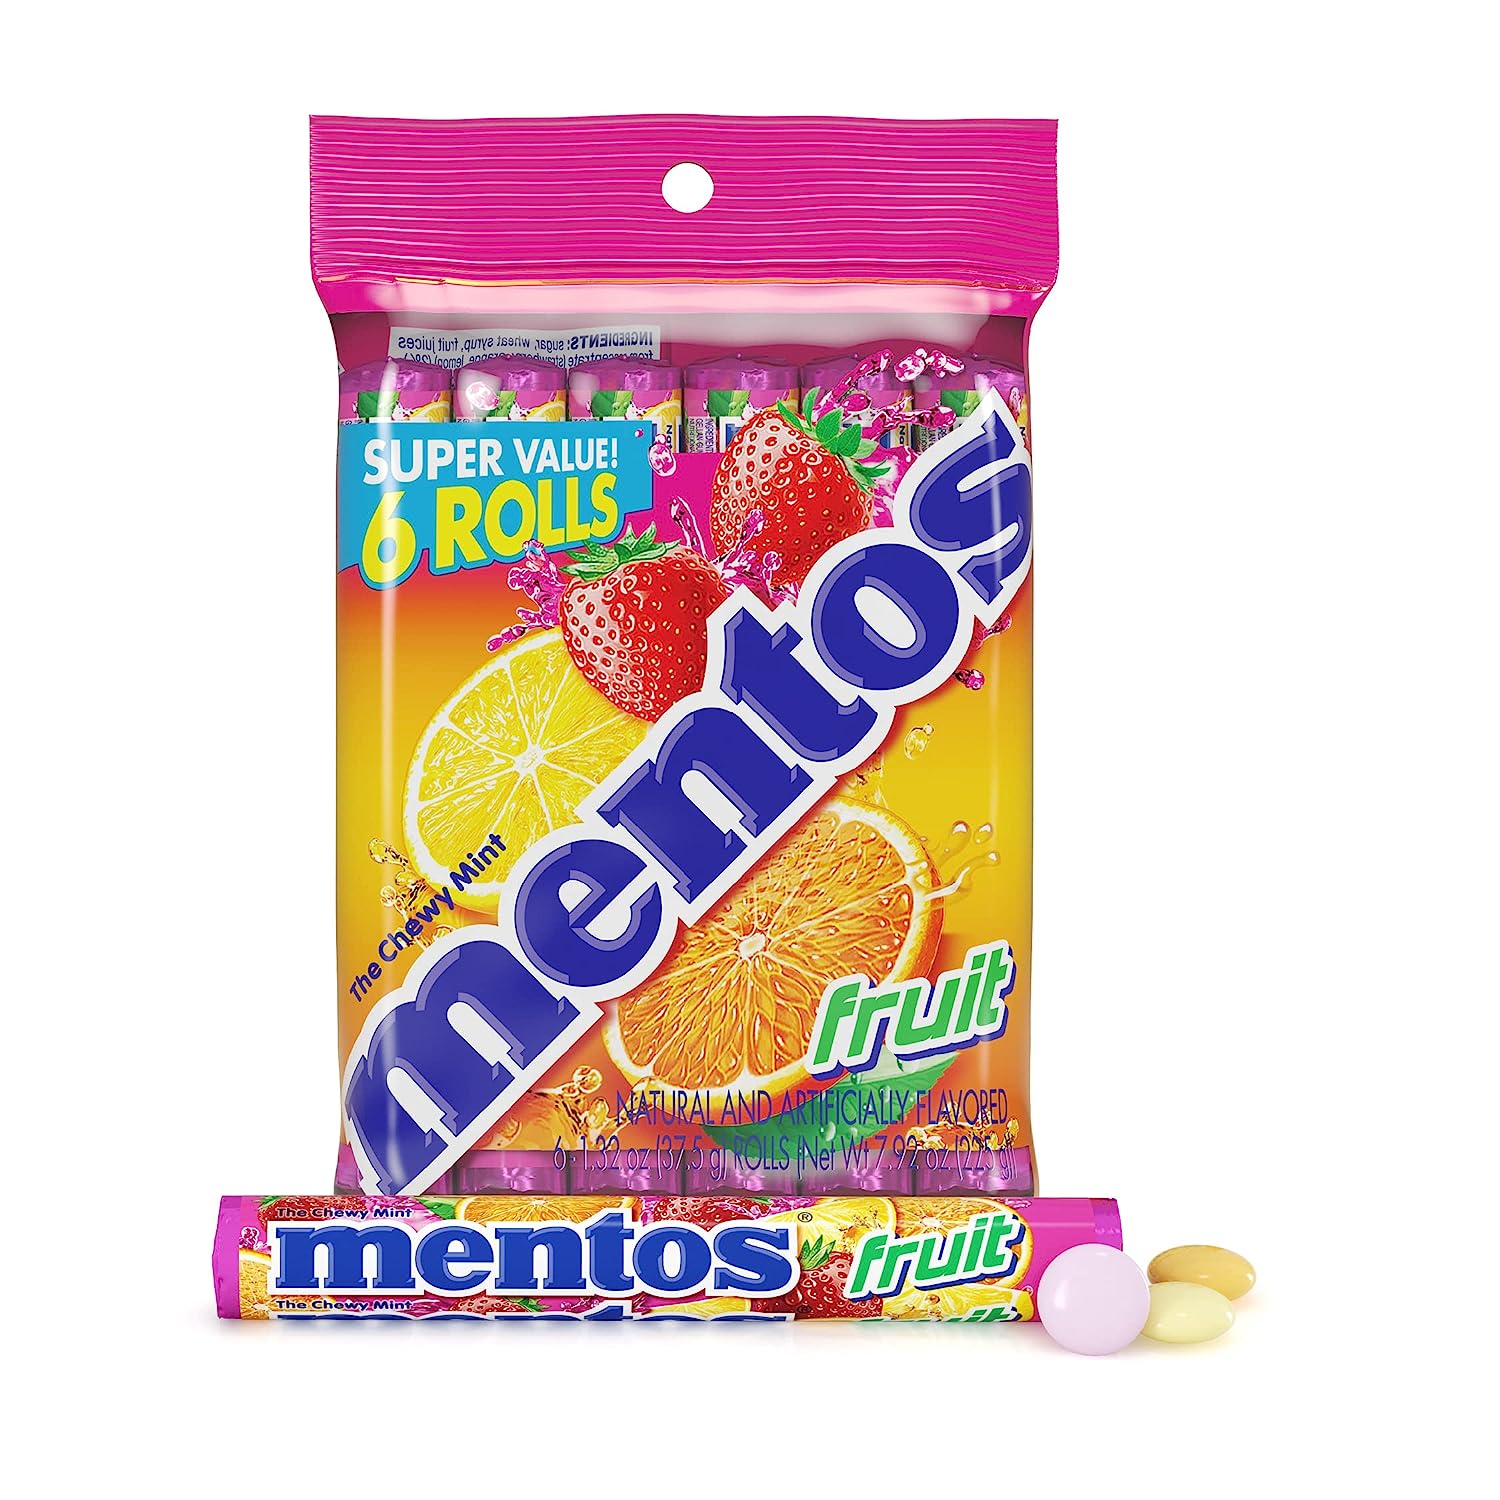 Mentos Chewy Mint Candy Roll, Assorted Fruit, Peanut & Tree Nut Free, Regular Size, 1.32 oz, 6 Count - image 1 of 7